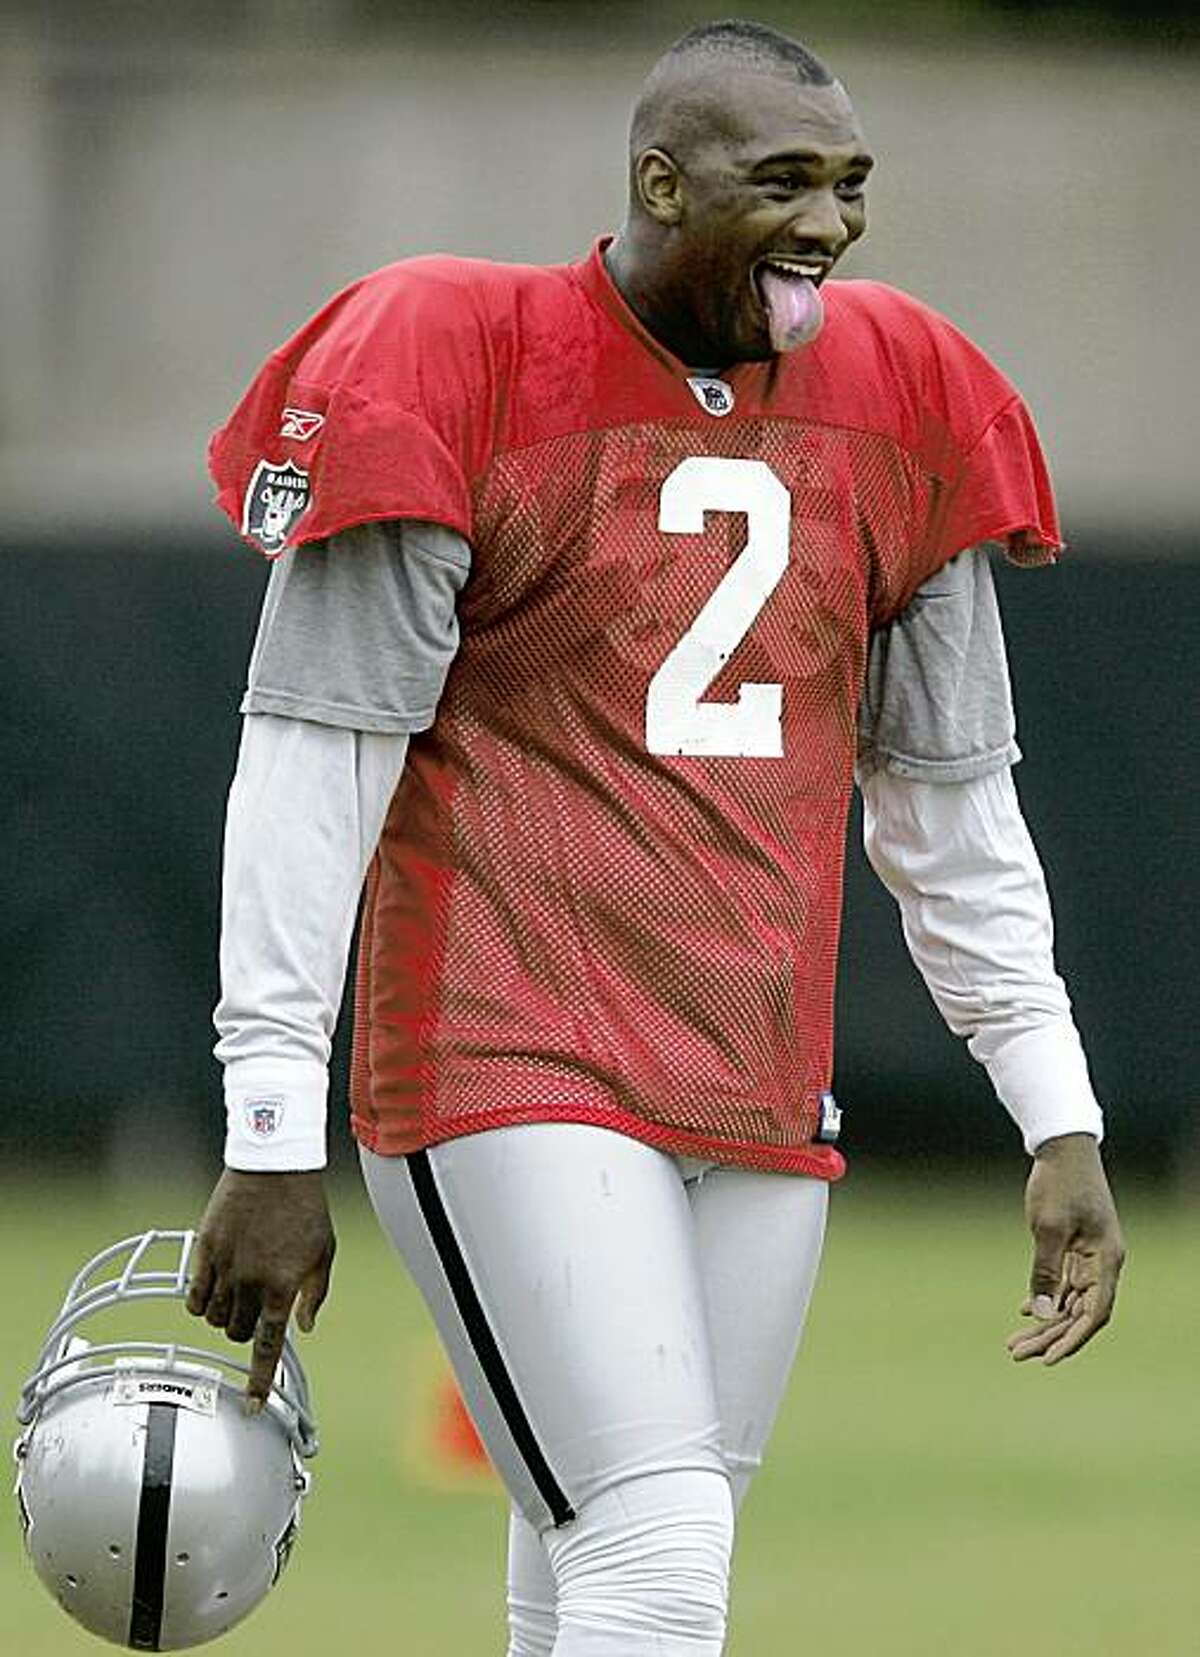 Oakland Raiders quarterback JaMarcus Russell makes a face at a teammate during training camp Wednesday, Aug. 19, 2009, in Napa, Calif. (AP Photo/The Press Democrat, Christopher Chung)